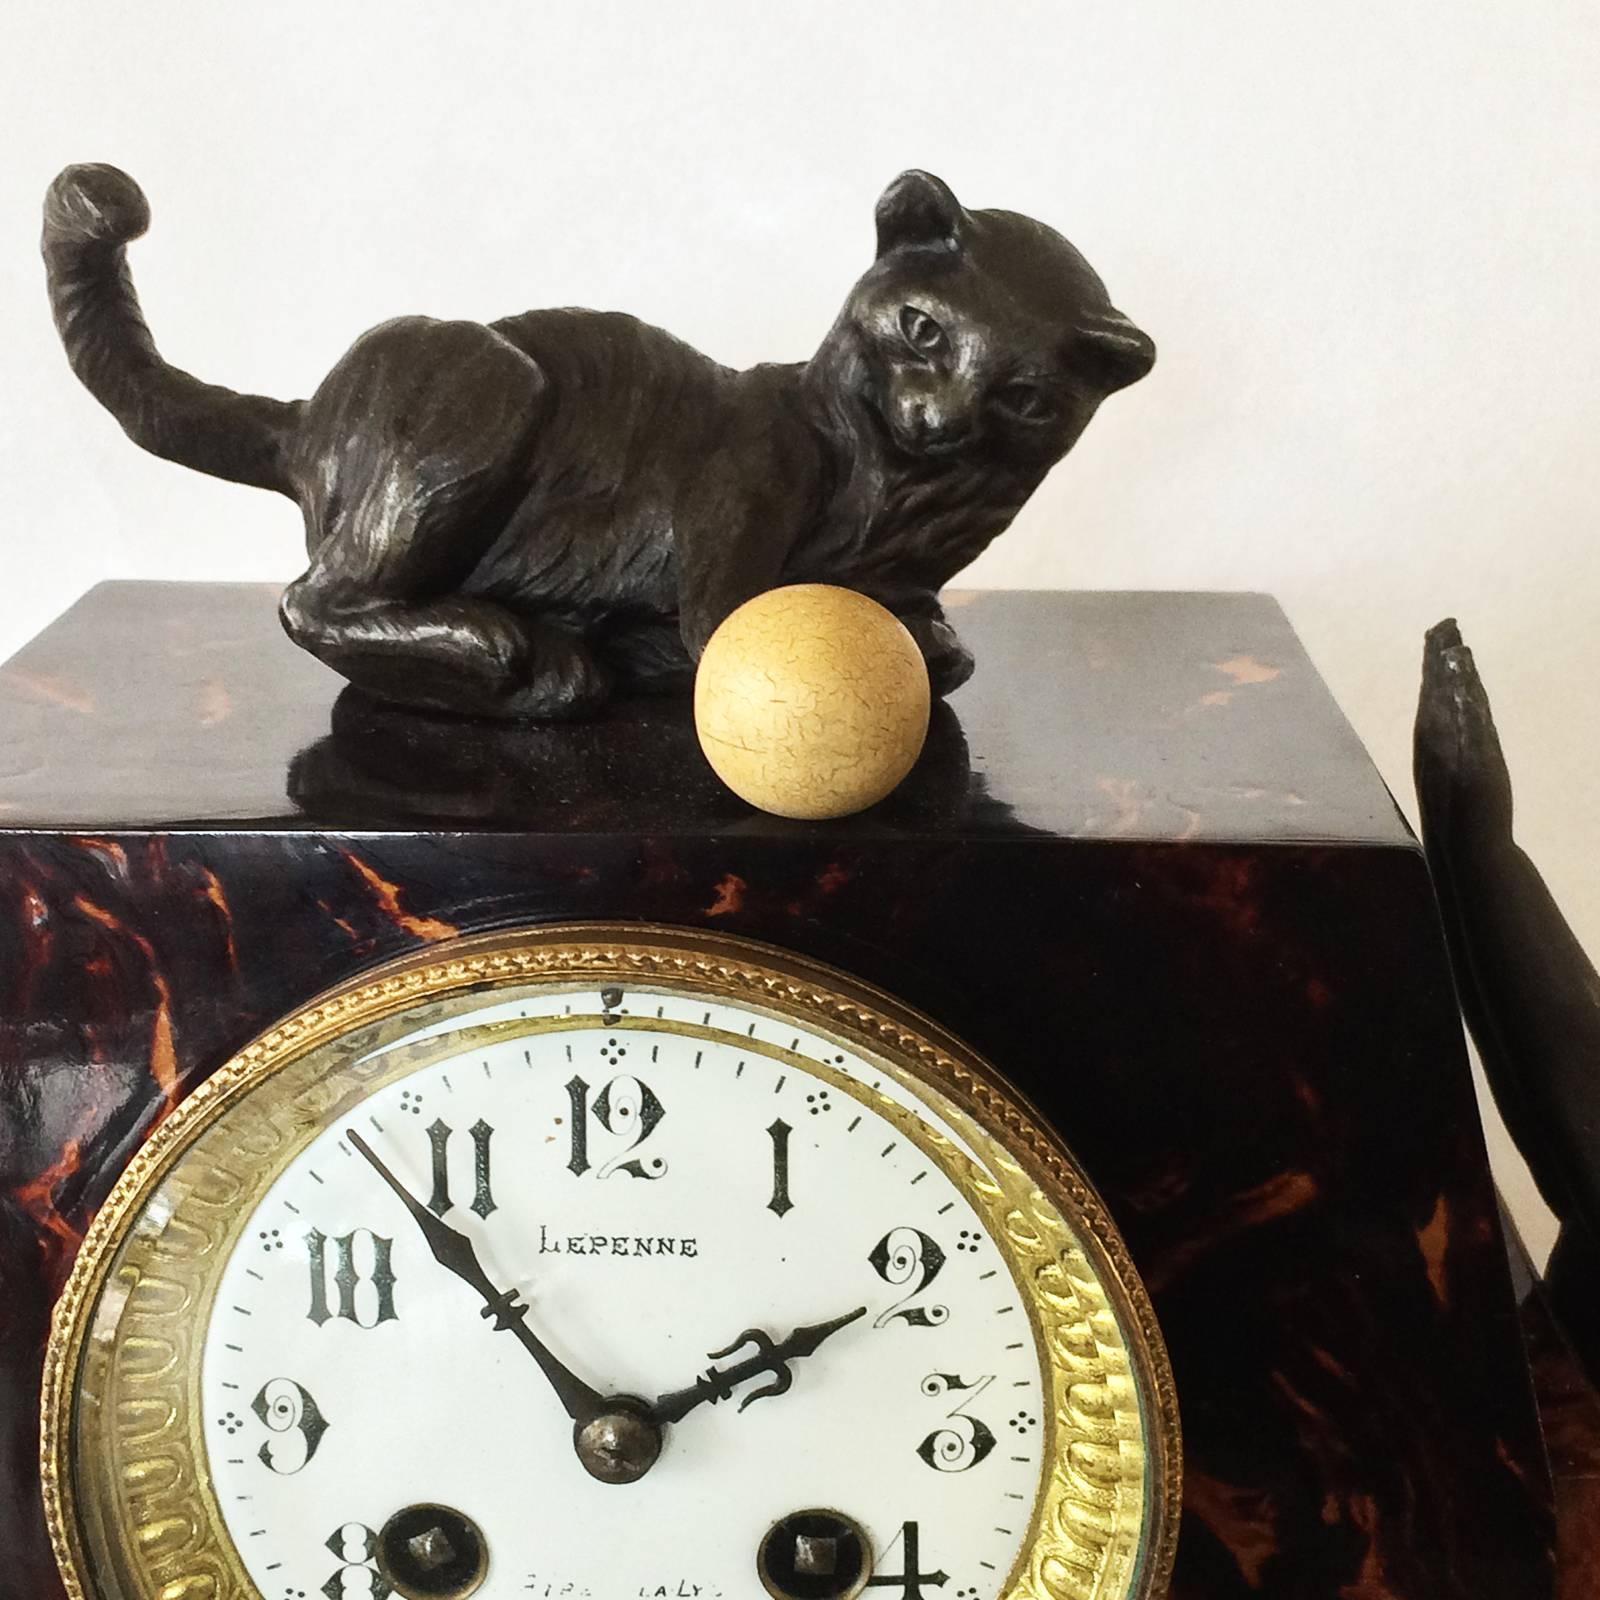 French clock faux tortoise shell, celluloid laminated on timber frame, with children playing with cat and ball of very early celluloid. An amazing historical piece, extremely rare and finely decorated. The clock is suspended above, exposing the